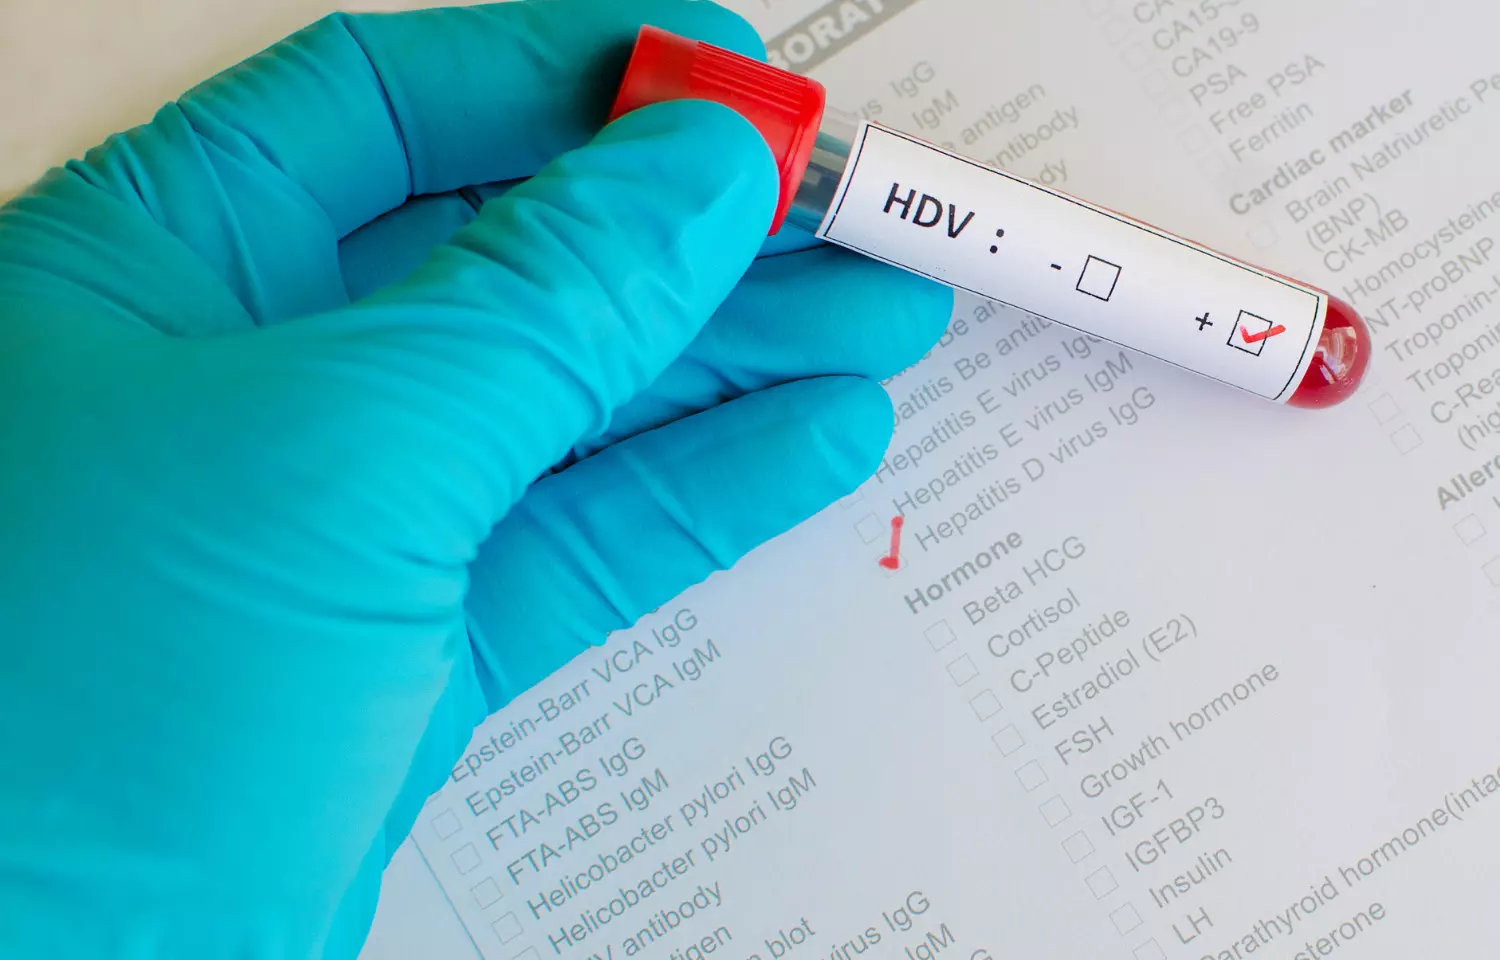 Karkinos Healthcare launches HPV test CerviRaksha priced at Rs 2499